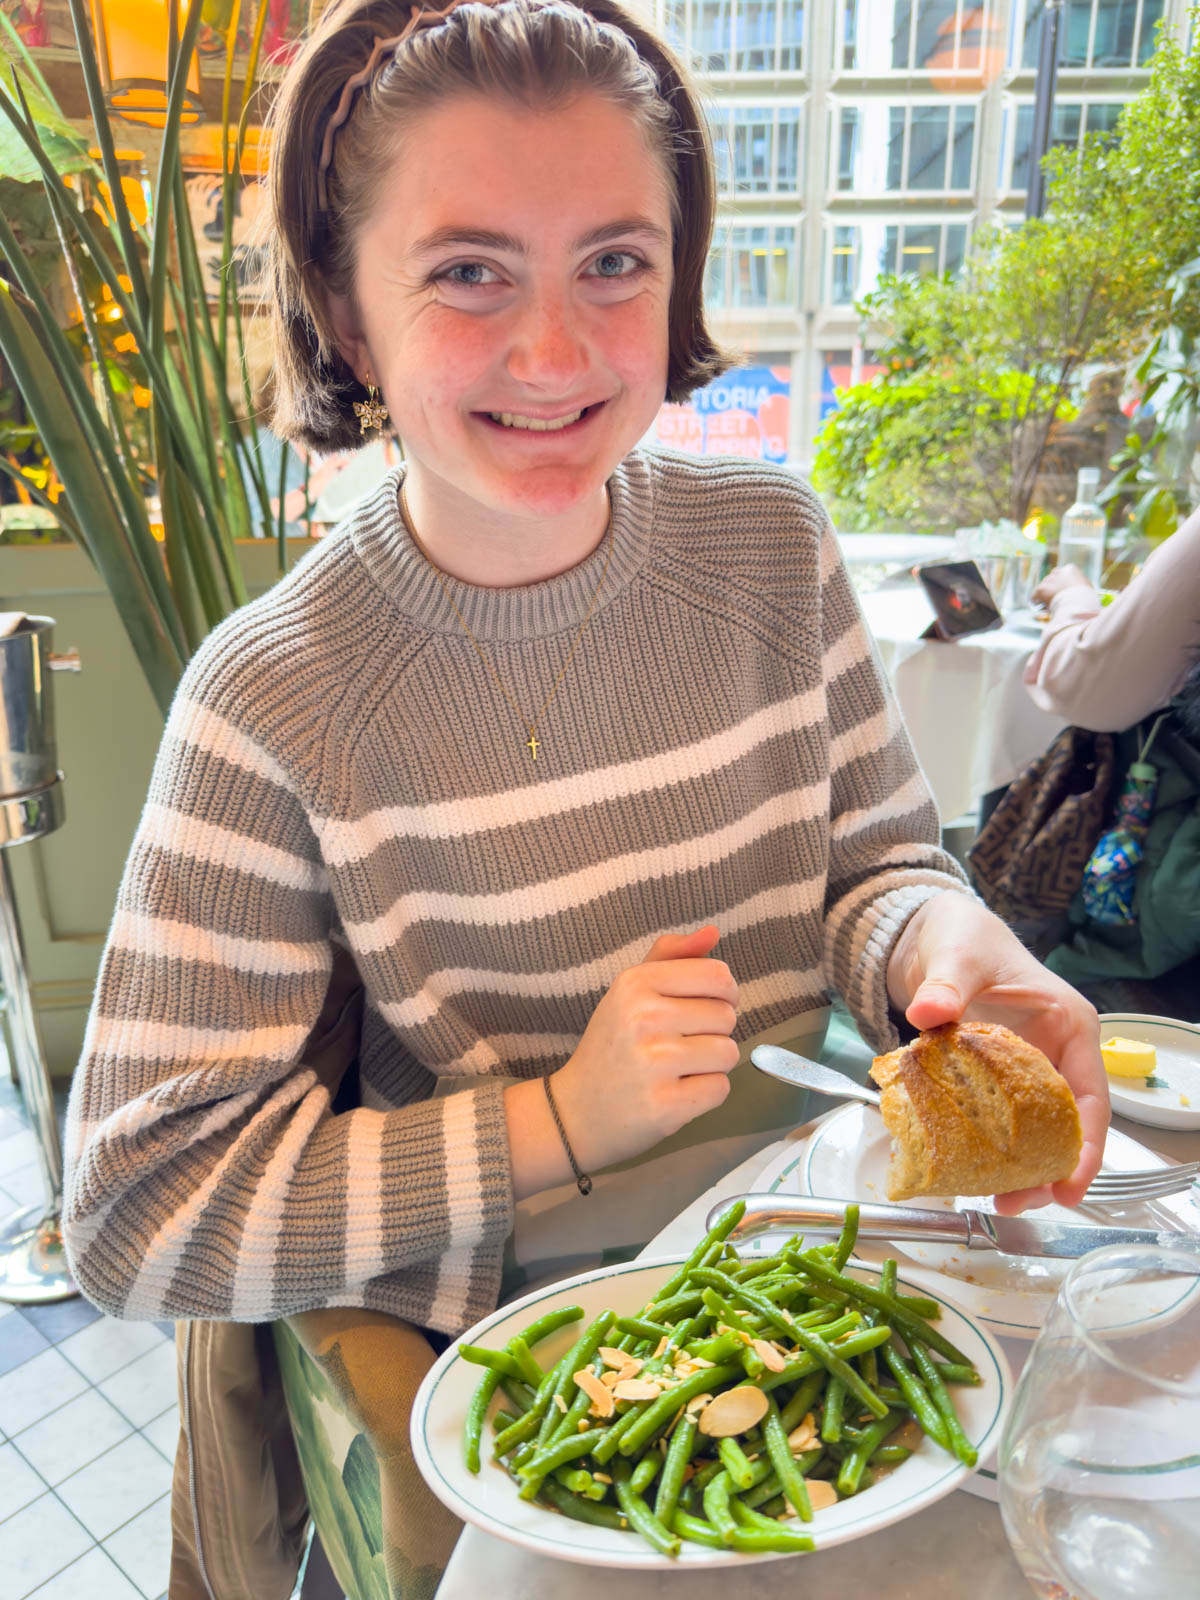 A young girl orders green beans from The Ivy in London.